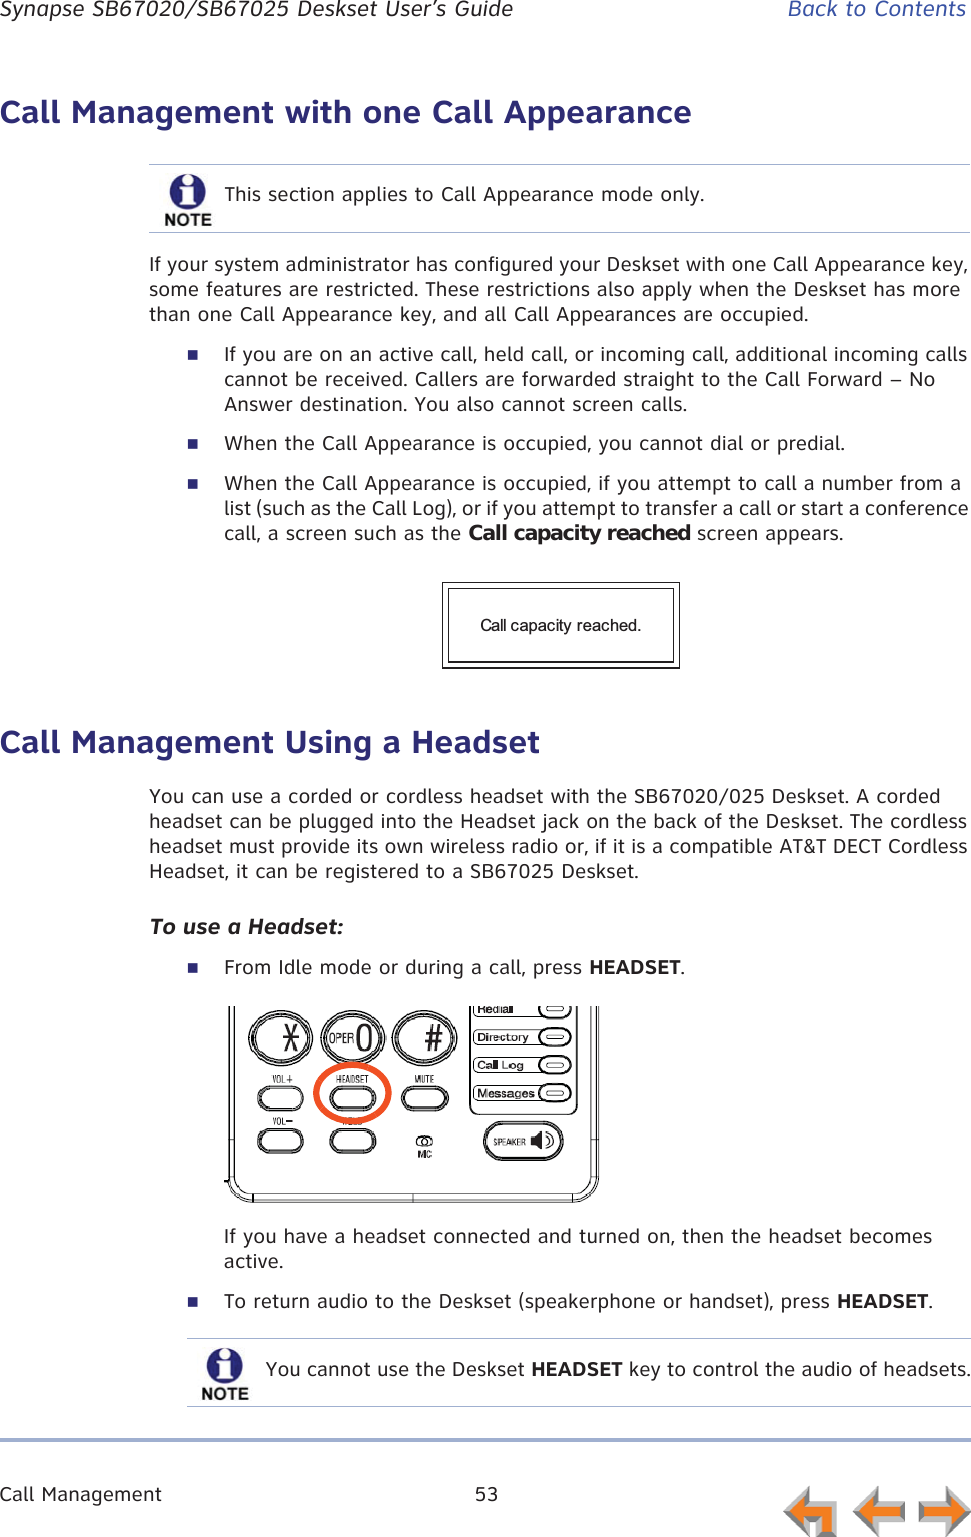 Call Management 53      Synapse SB67020/SB67025 Deskset User’s Guide Back to ContentsCall Management with one Call AppearanceIf your system administrator has configured your Deskset with one Call Appearance key, some features are restricted. These restrictions also apply when the Deskset has more than one Call Appearance key, and all Call Appearances are occupied.If you are on an active call, held call, or incoming call, additional incoming calls cannot be received. Callers are forwarded straight to the Call Forward – No Answer destination. You also cannot screen calls.When the Call Appearance is occupied, you cannot dial or predial. When the Call Appearance is occupied, if you attempt to call a number from a list (such as the Call Log), or if you attempt to transfer a call or start a conference call, a screen such as the Call capacity reached screen appears.Call Management Using a HeadsetYou can use a corded or cordless headset with the SB67020/025 Deskset. A corded headset can be plugged into the Headset jack on the back of the Deskset. The cordless headset must provide its own wireless radio or, if it is a compatible AT&amp;T DECT Cordless Headset, it can be registered to a SB67025 Deskset.To use a Headset:From Idle mode or during a call, press HEADSET.If you have a headset connected and turned on, then the headset becomes active.To return audio to the Deskset (speakerphone or handset), press HEADSET.This section applies to Call Appearance mode only.Call capacity reached.You cannot use the Deskset HEADSET key to control the audio of headsets.